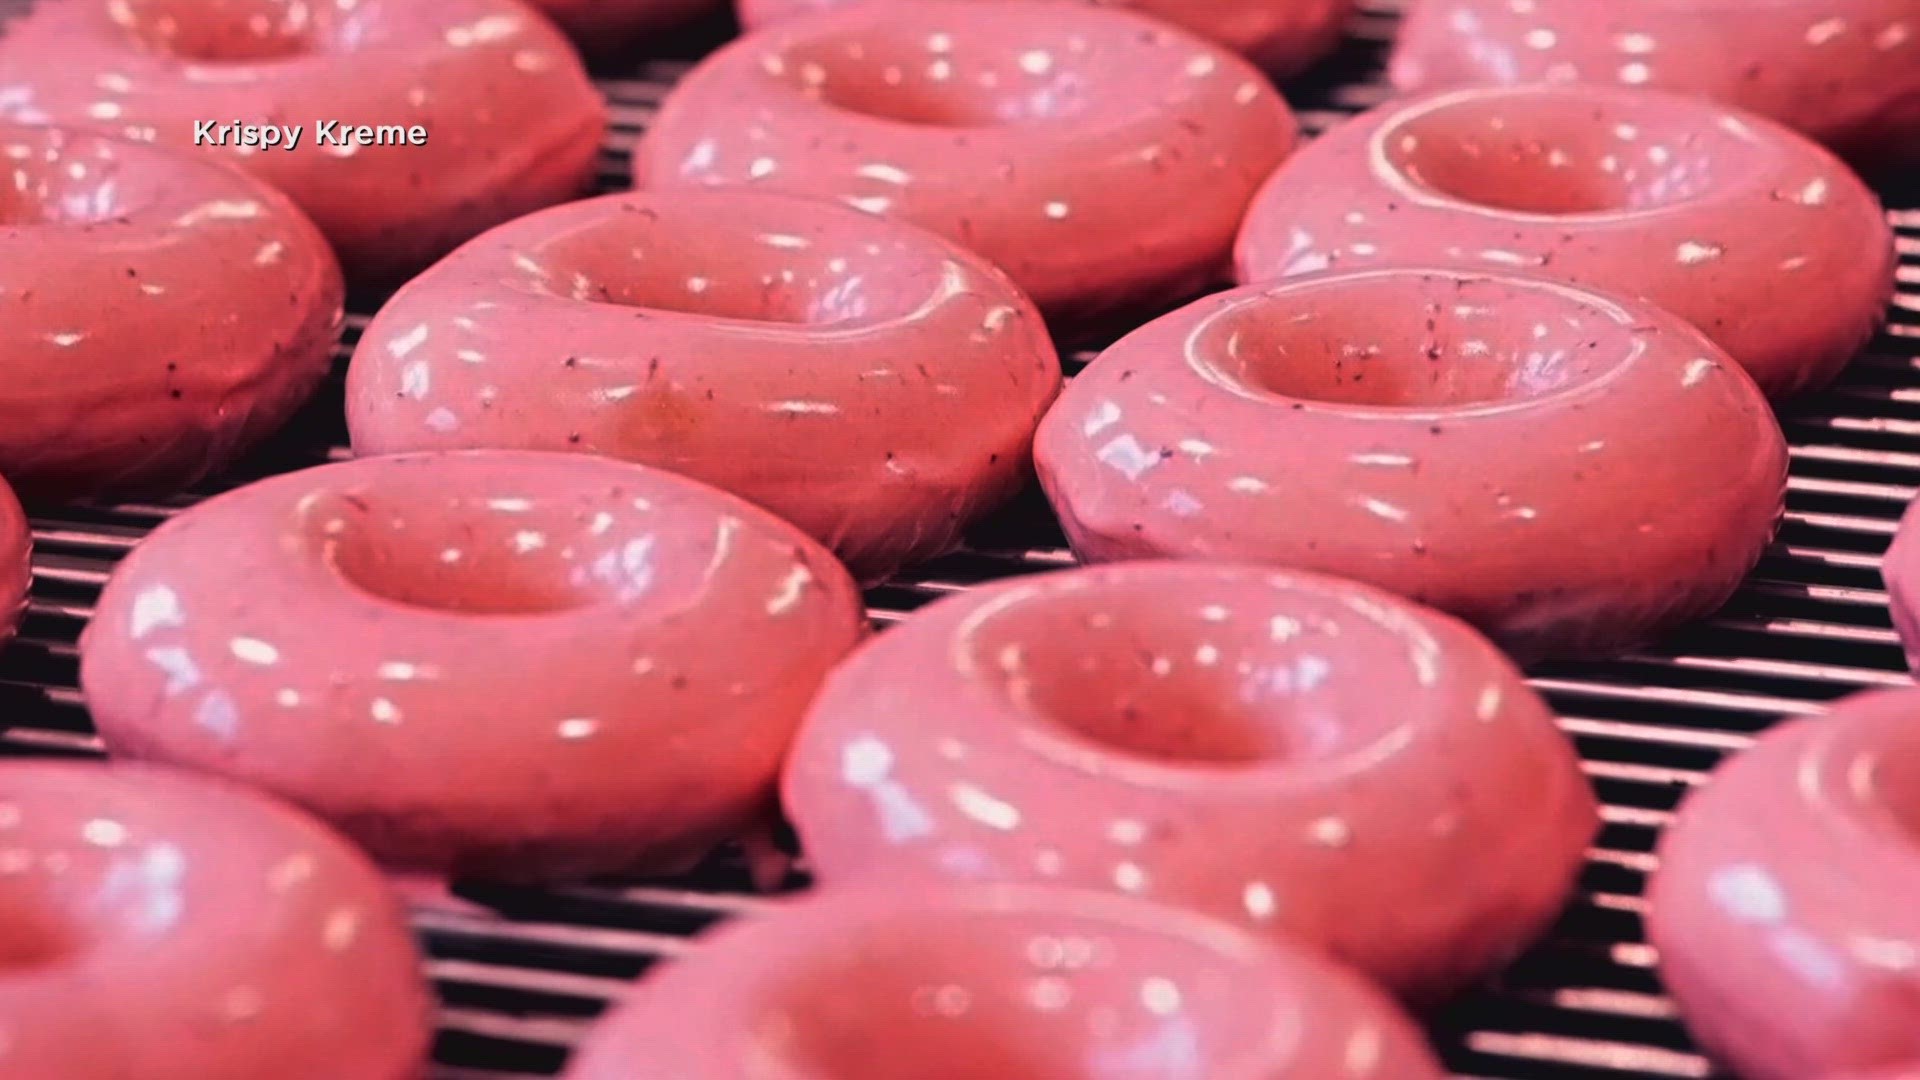 The popular strawberry glazed doughnut will only be available through Labor Day Weekend.